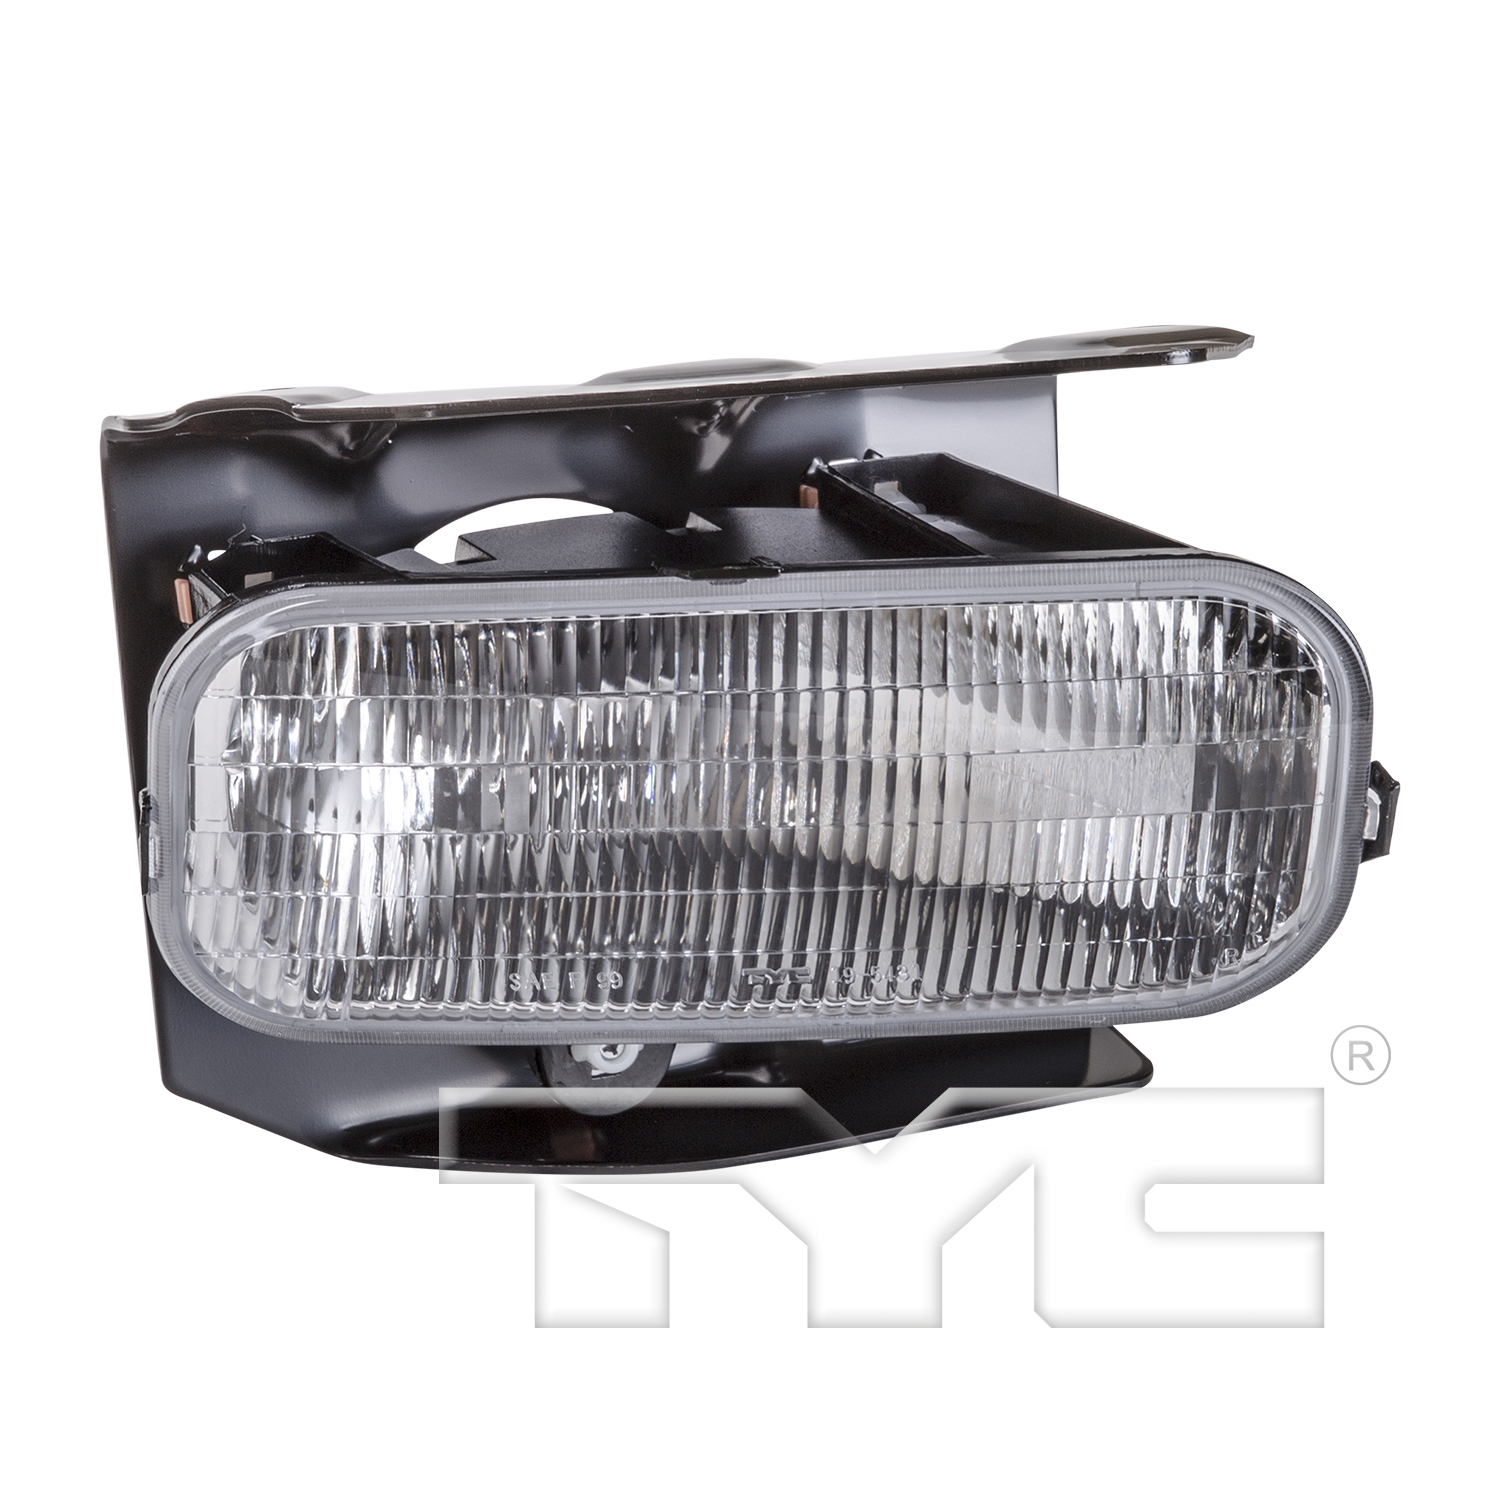 Aftermarket FOG LIGHTS for FORD - EXPEDITION, EXPEDITION,99-02,RT Fog lamp assy